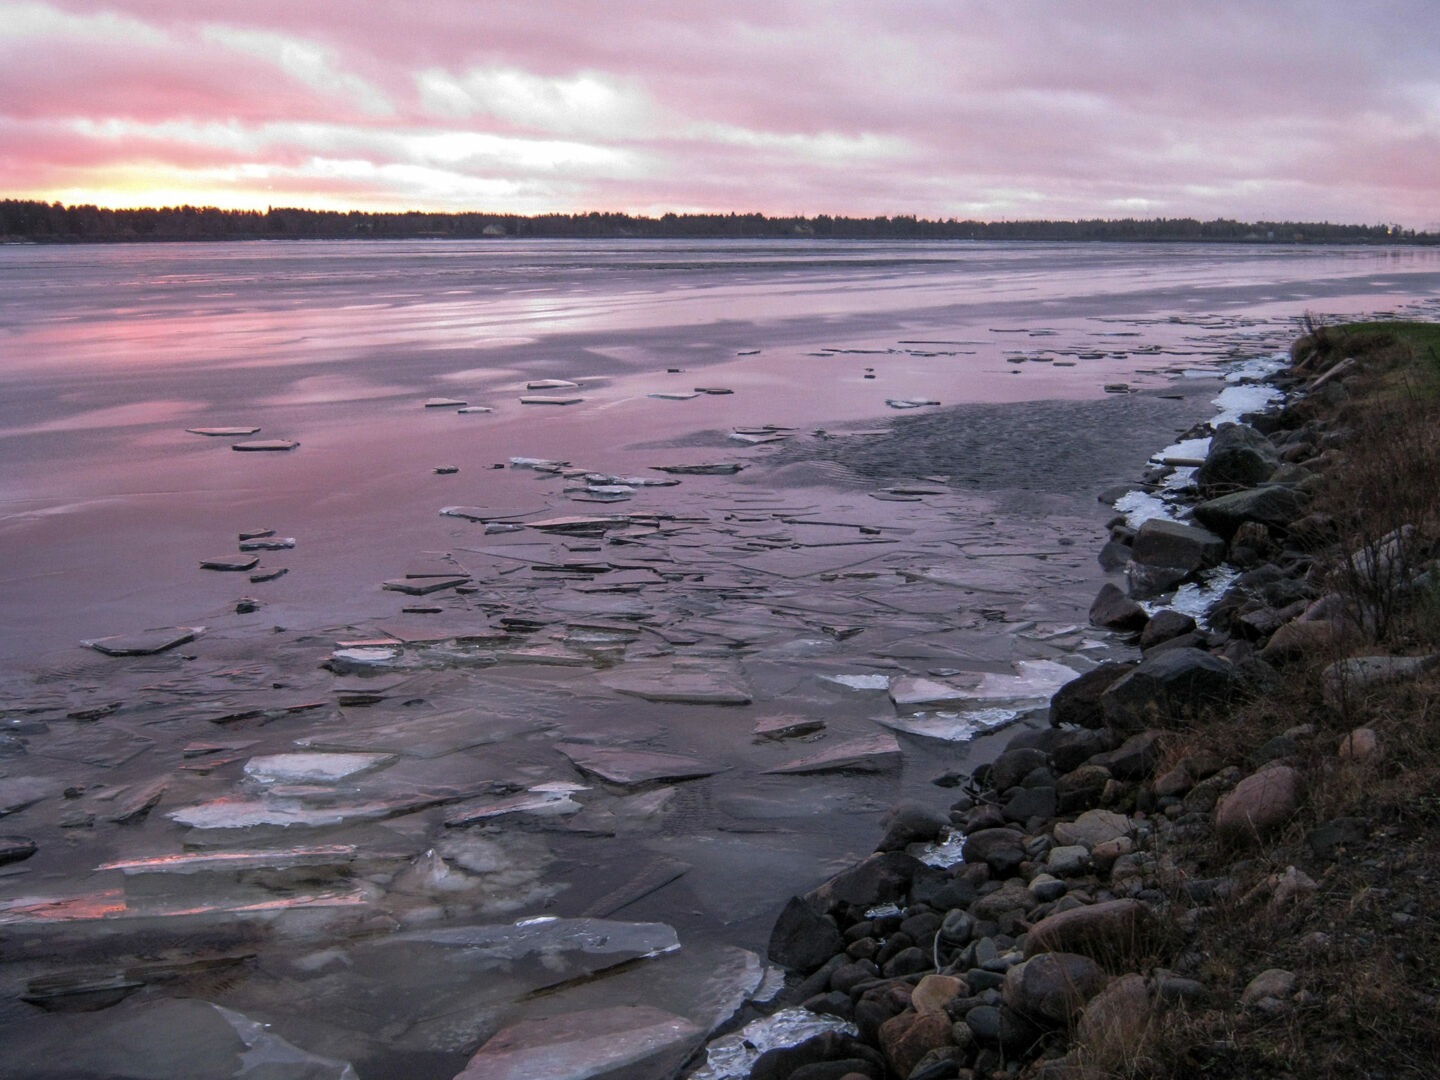 Ice breaking up in the river in Keminmaa, Finland, in retro and rural Sea Lapland